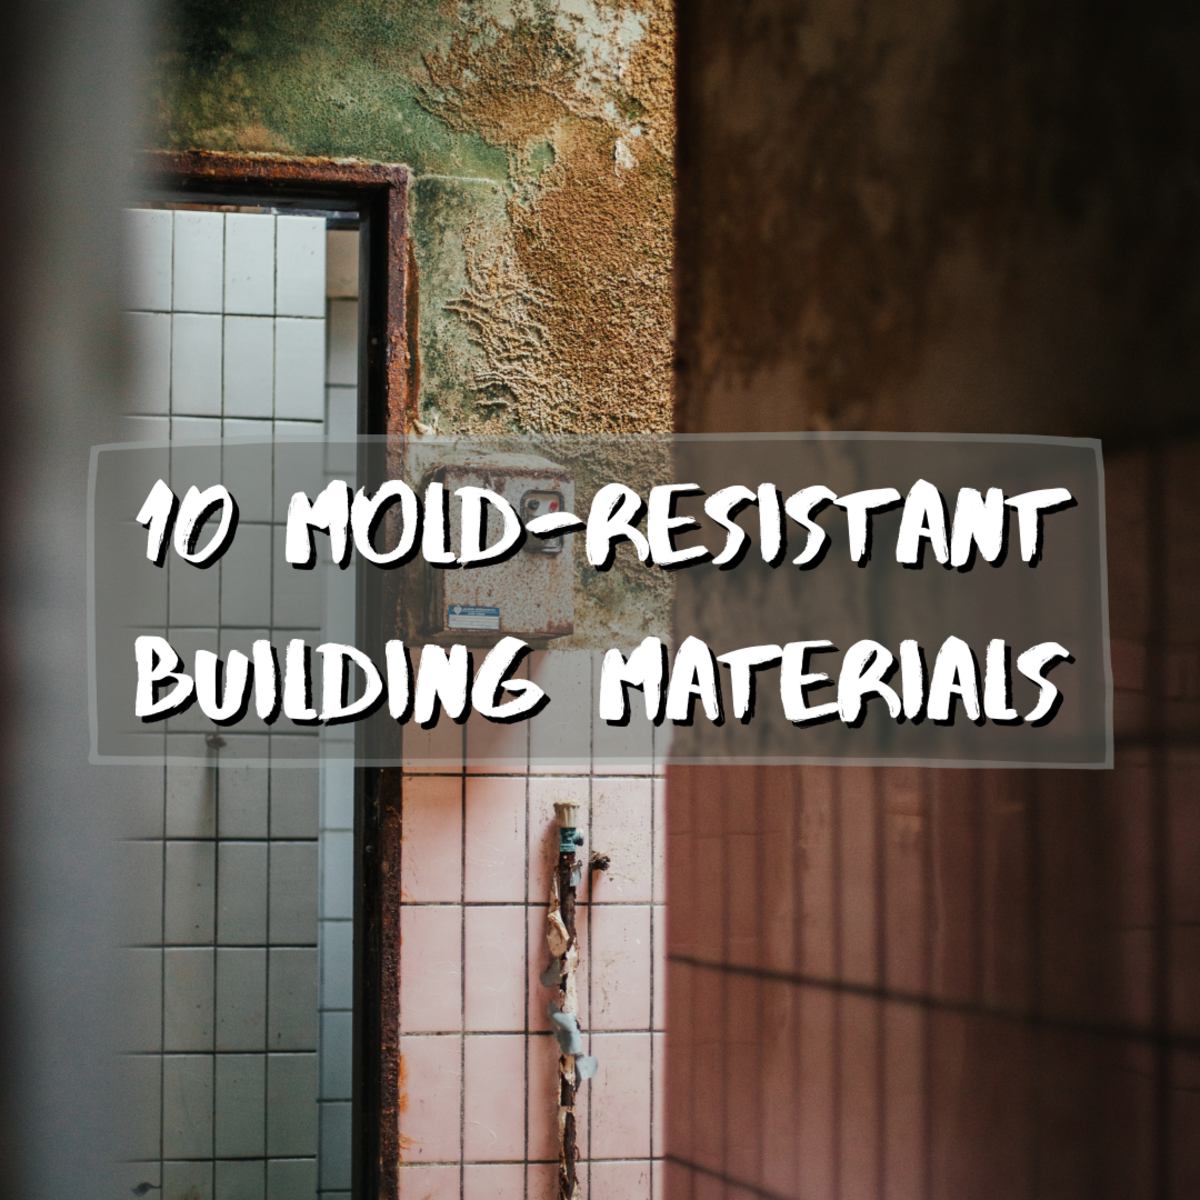 Read on to learn about 10 amazing mold resistant materials used in construction, including mold resistant wood, insulation, and drywall!